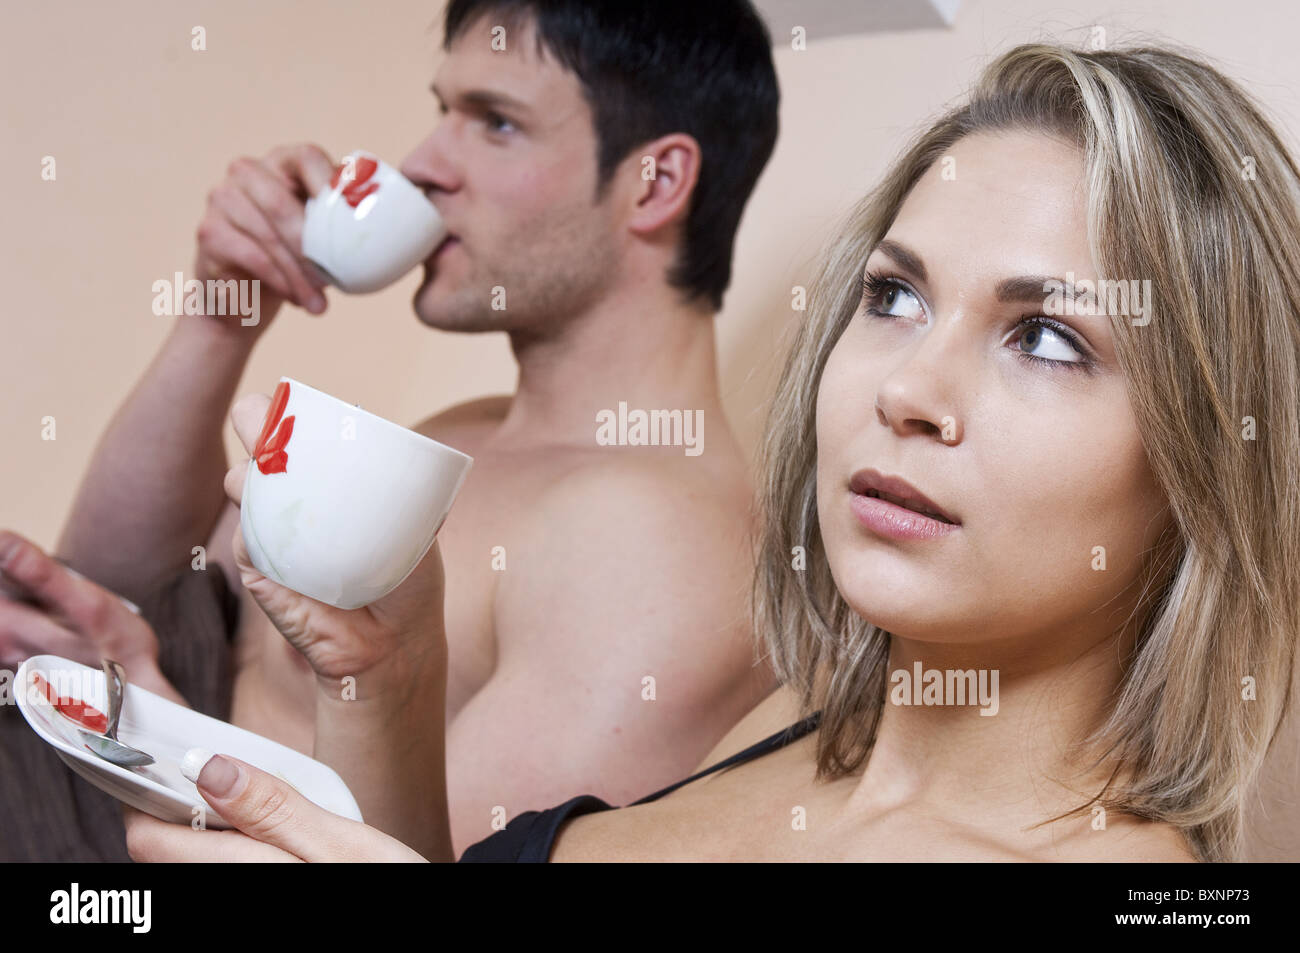 Breakfast together Stock Photo